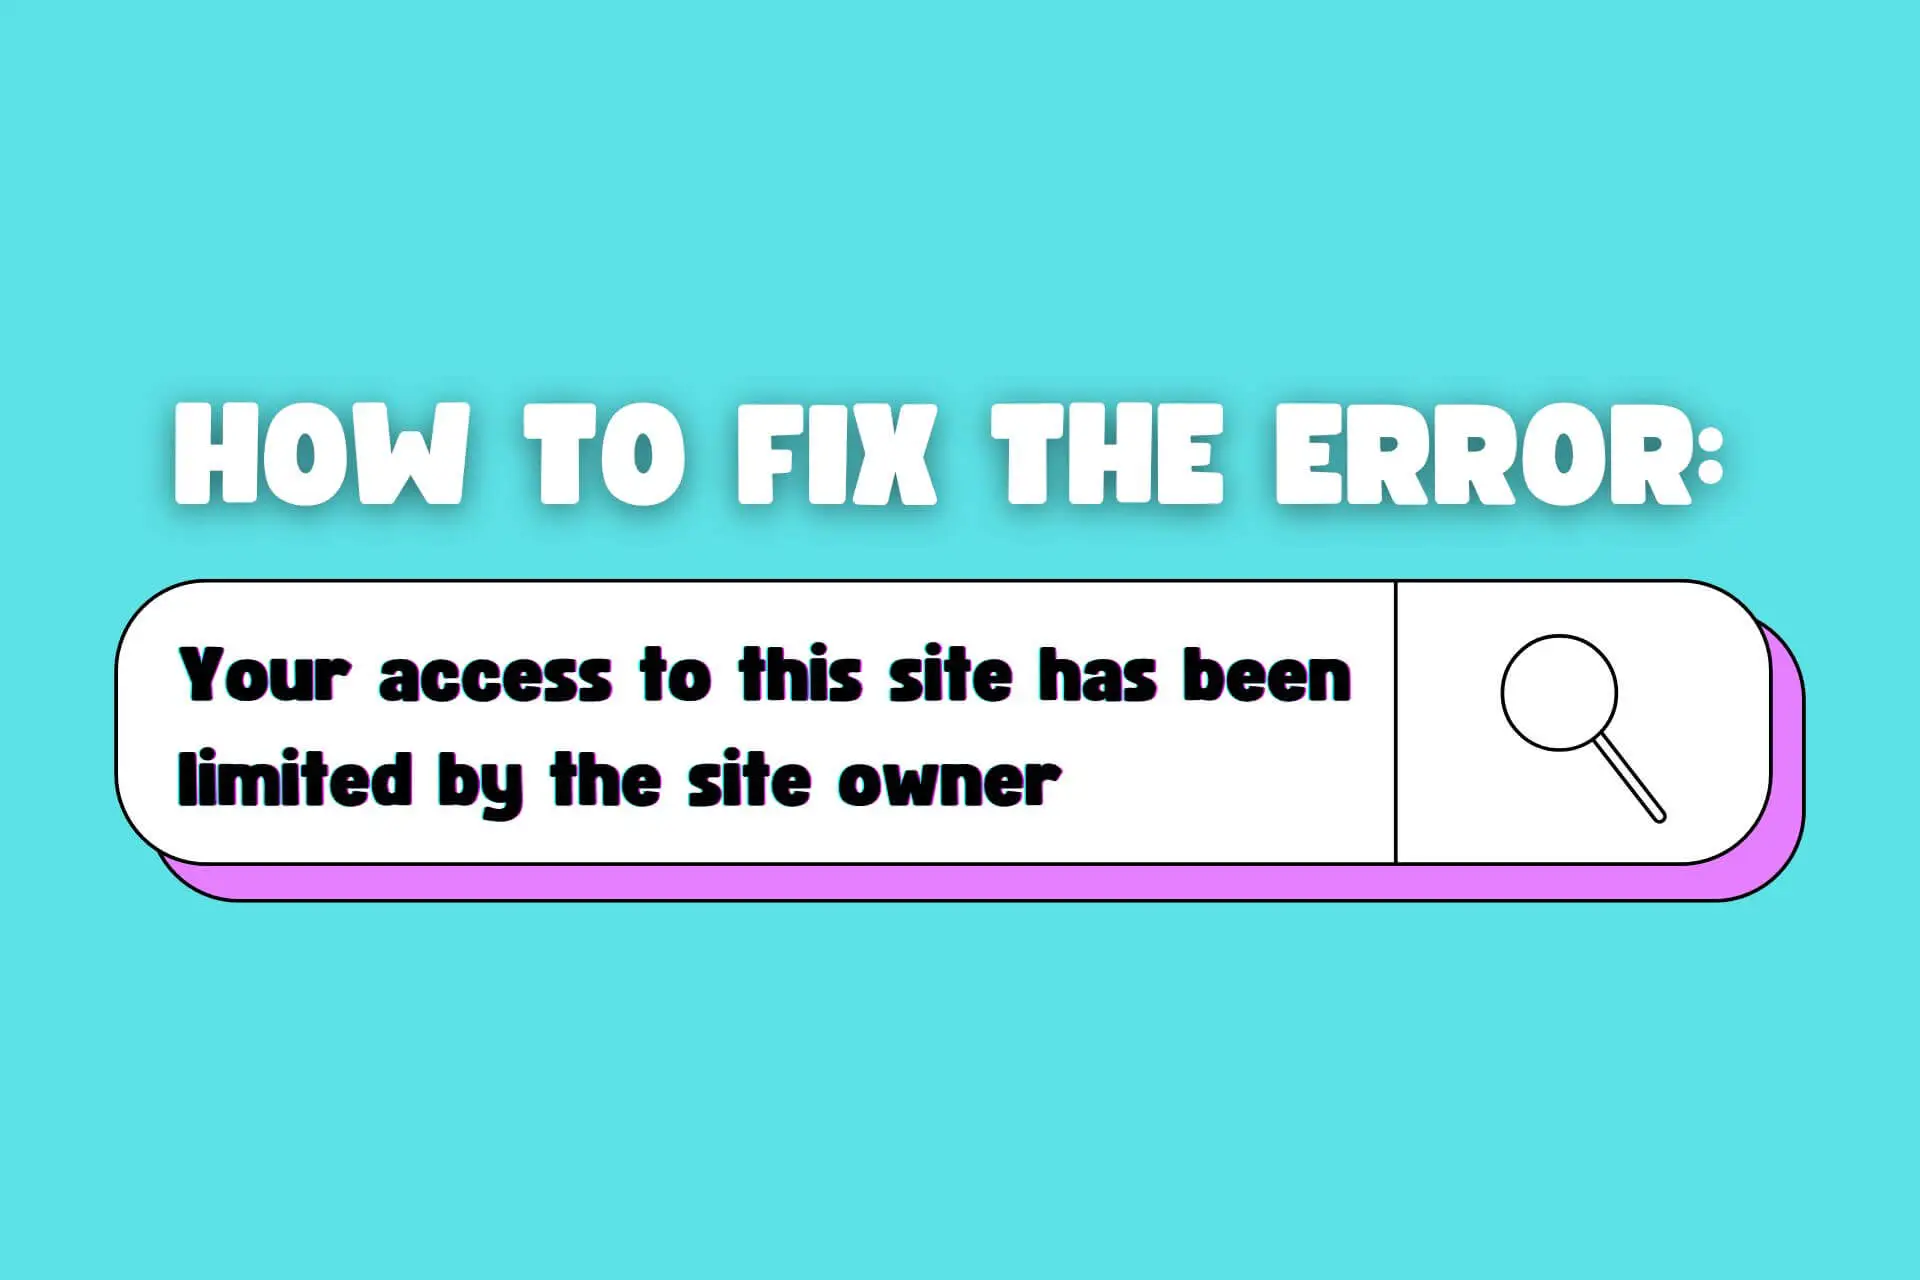 your access to this site has been limited by the site owner